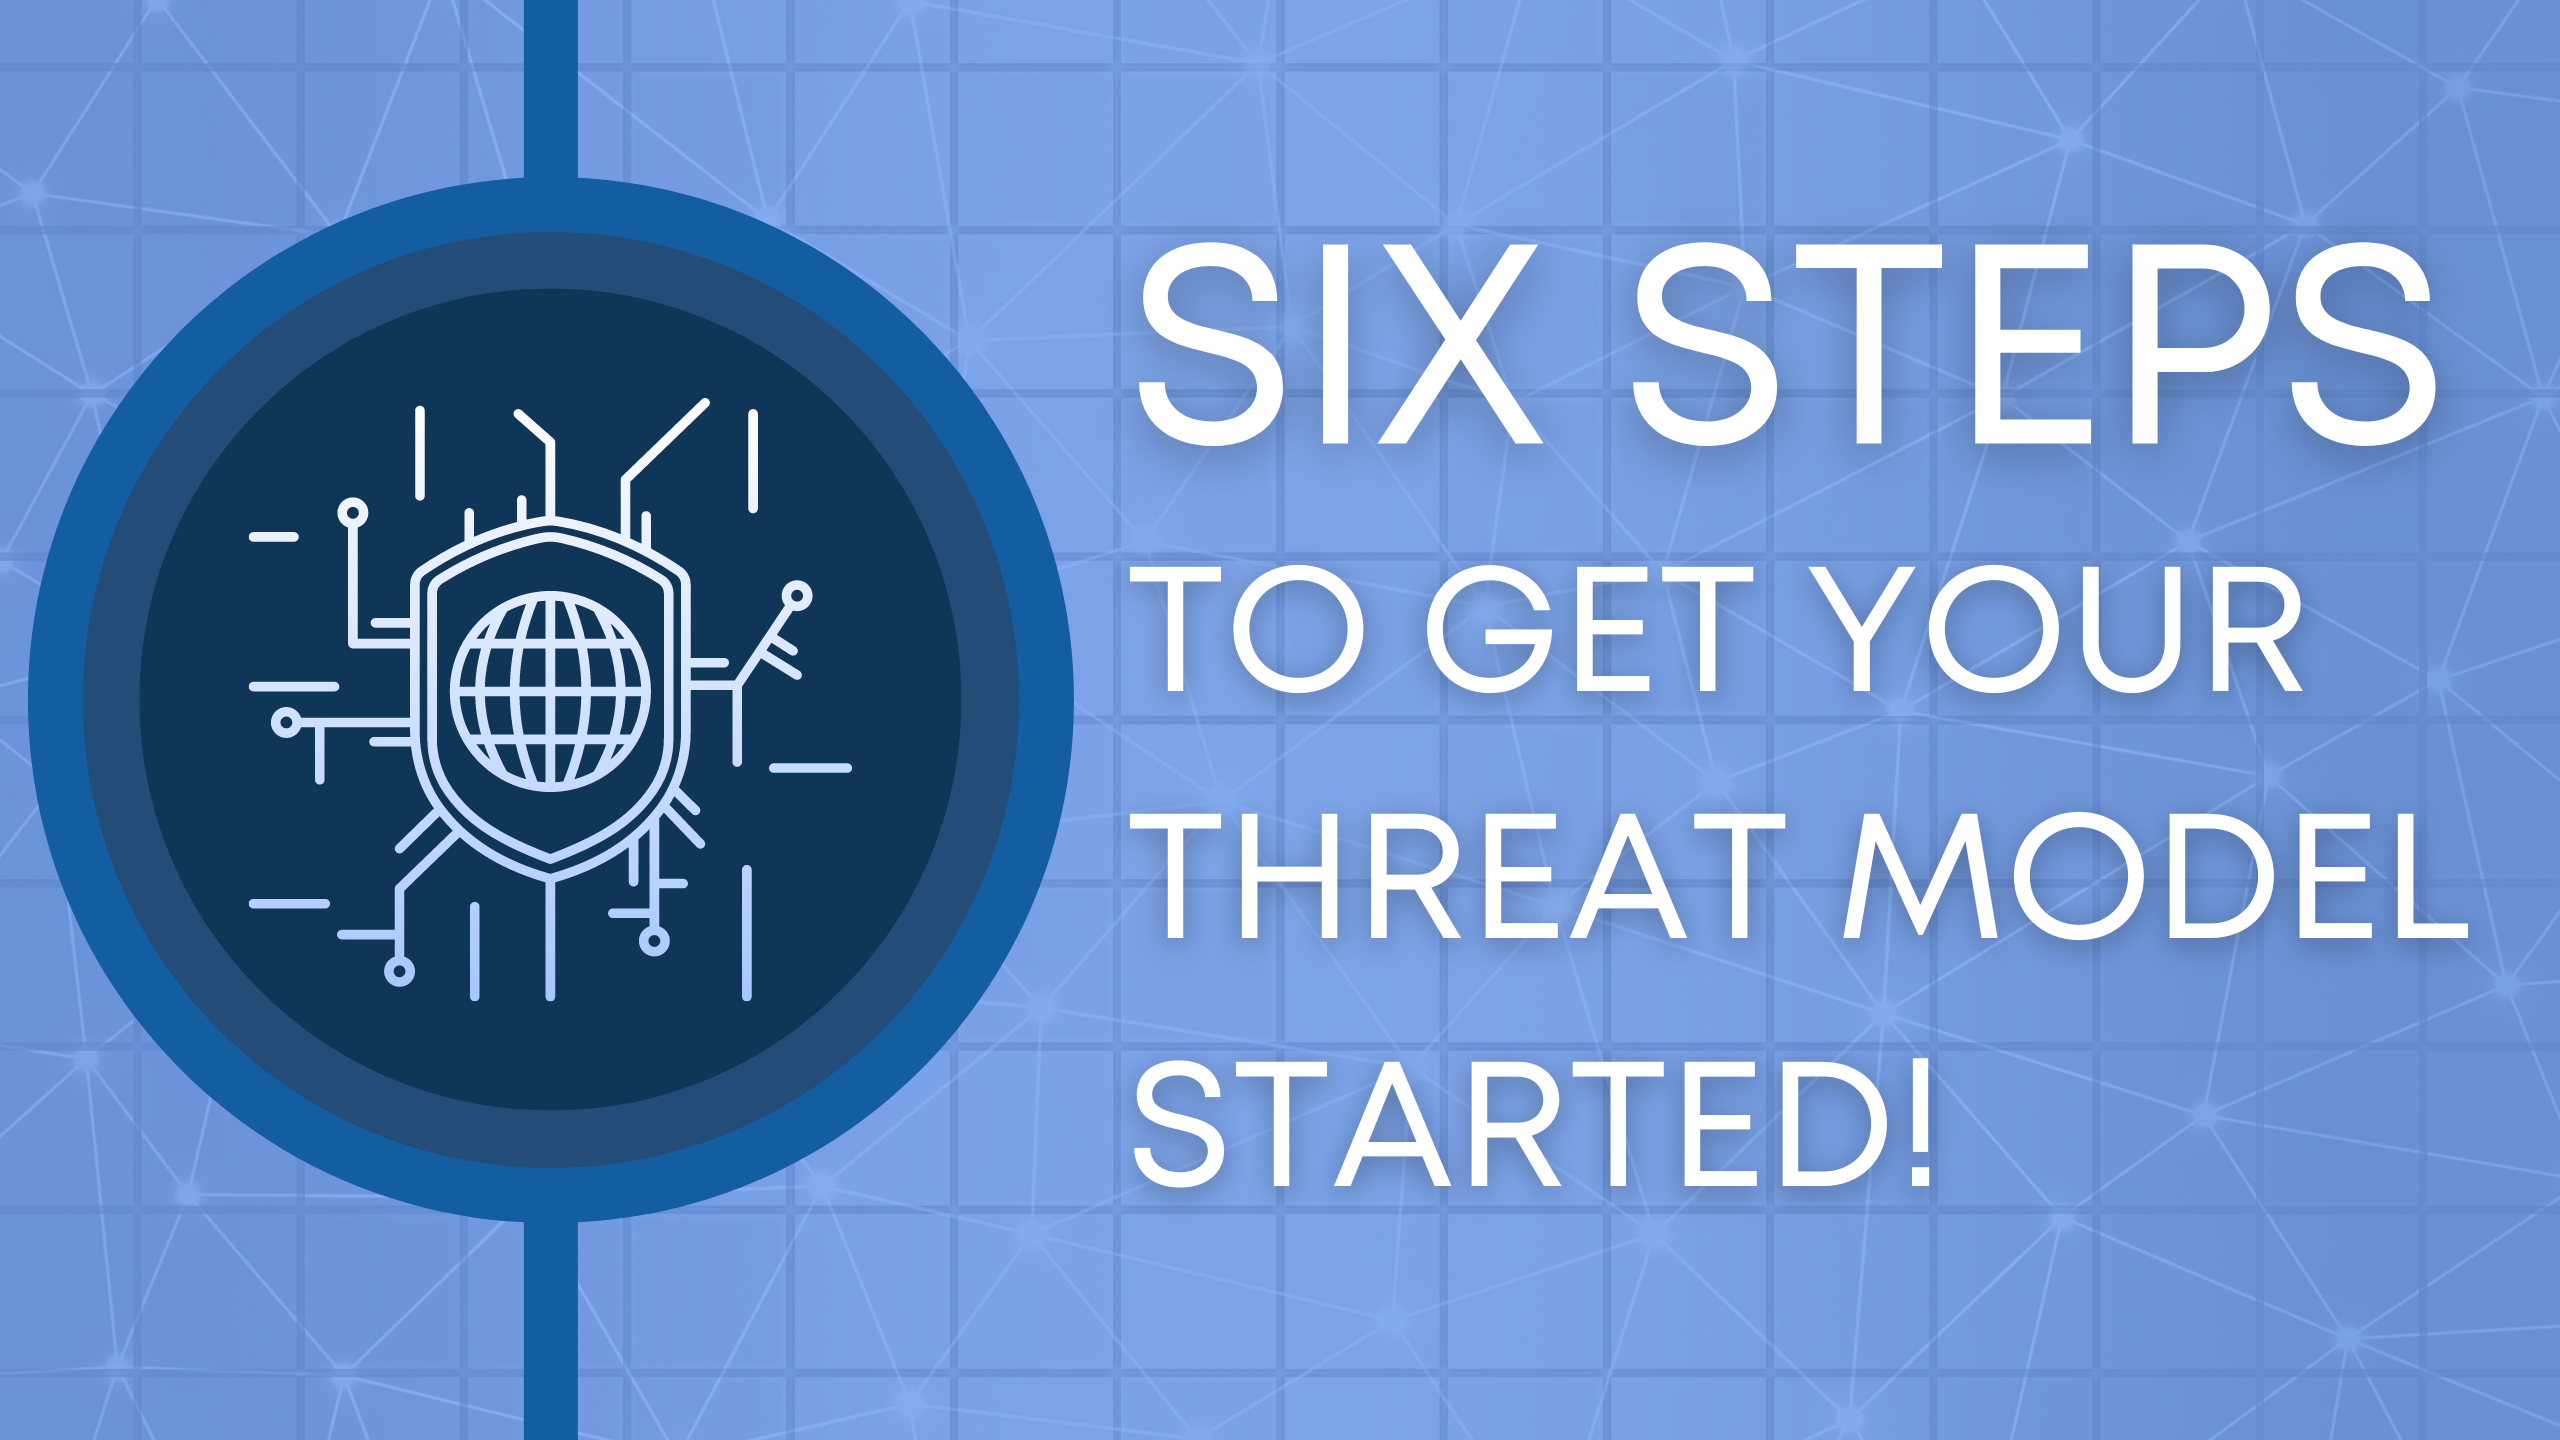 TO GET YOUR THREAT MODEL STARTED!-3